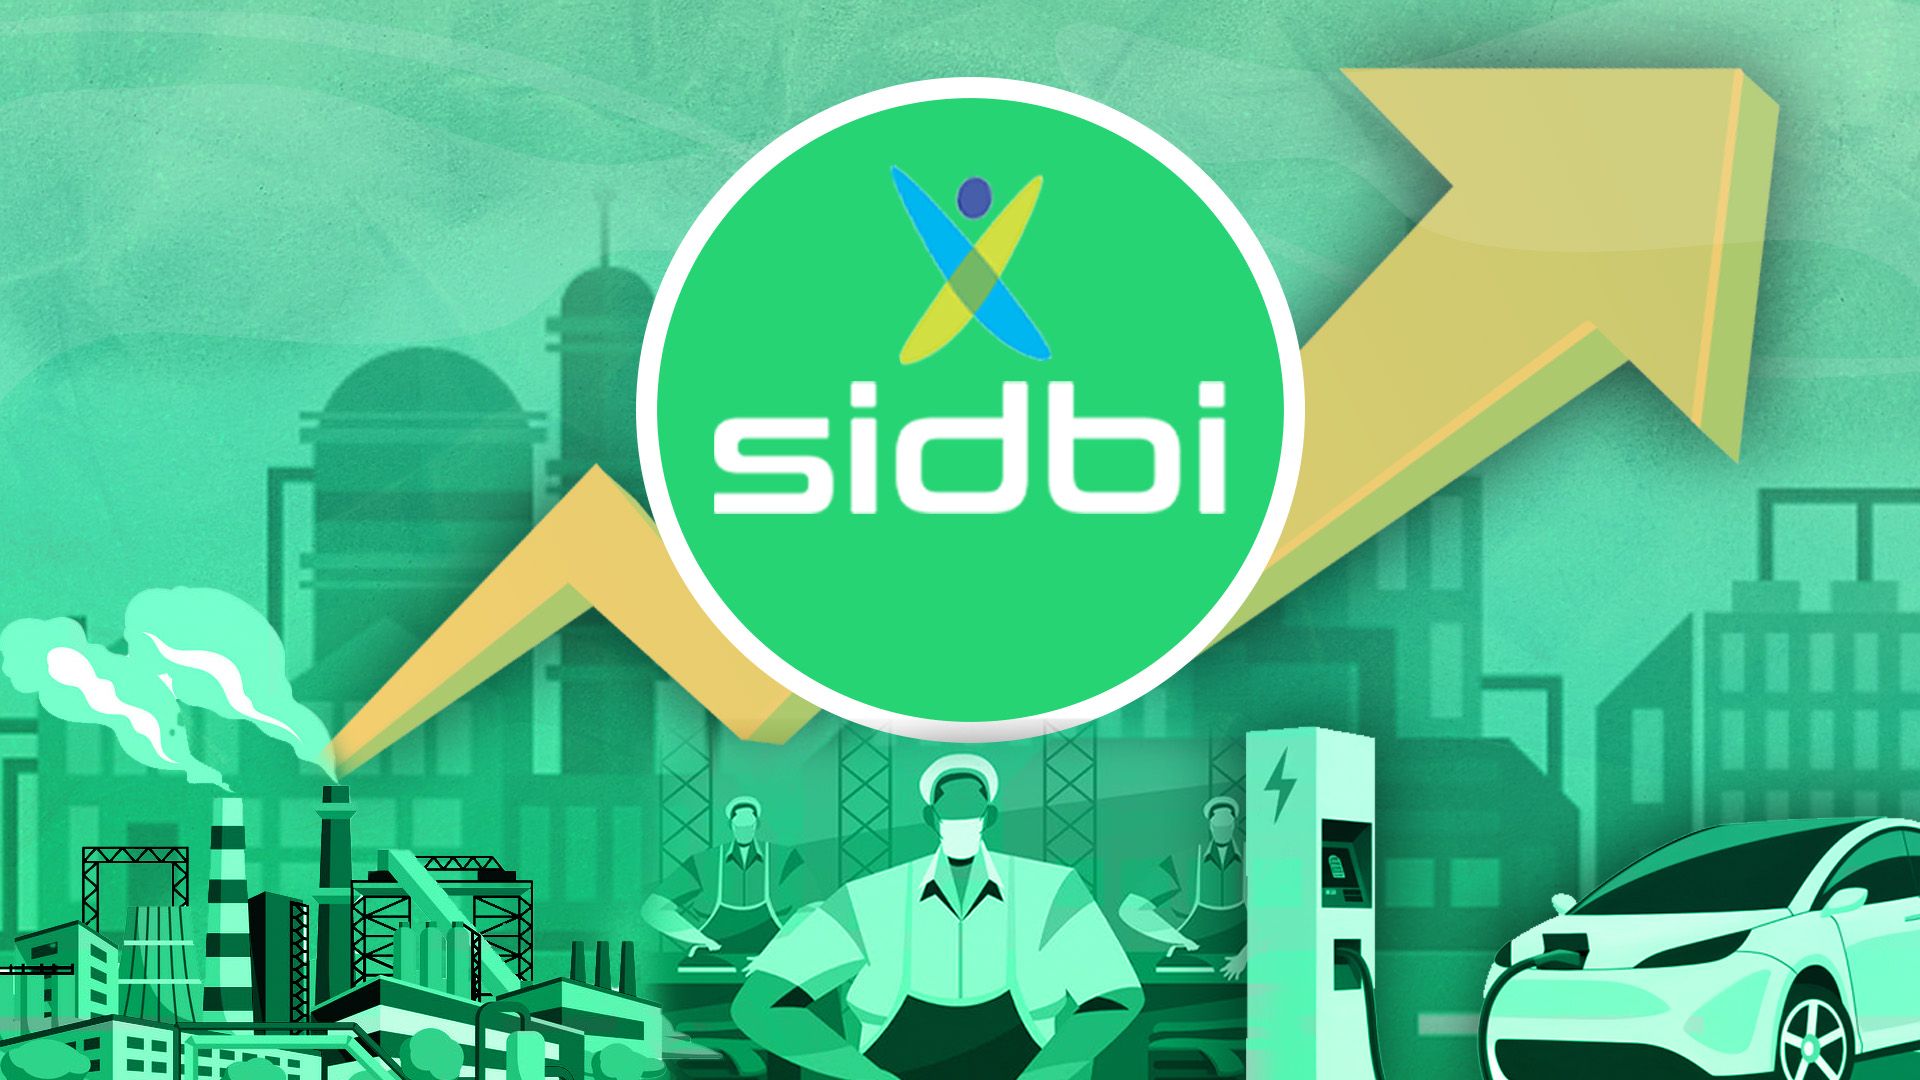 SIDBI plans to raise Rs 10,000 Cr from rights issue next fiscal to expand equity capital